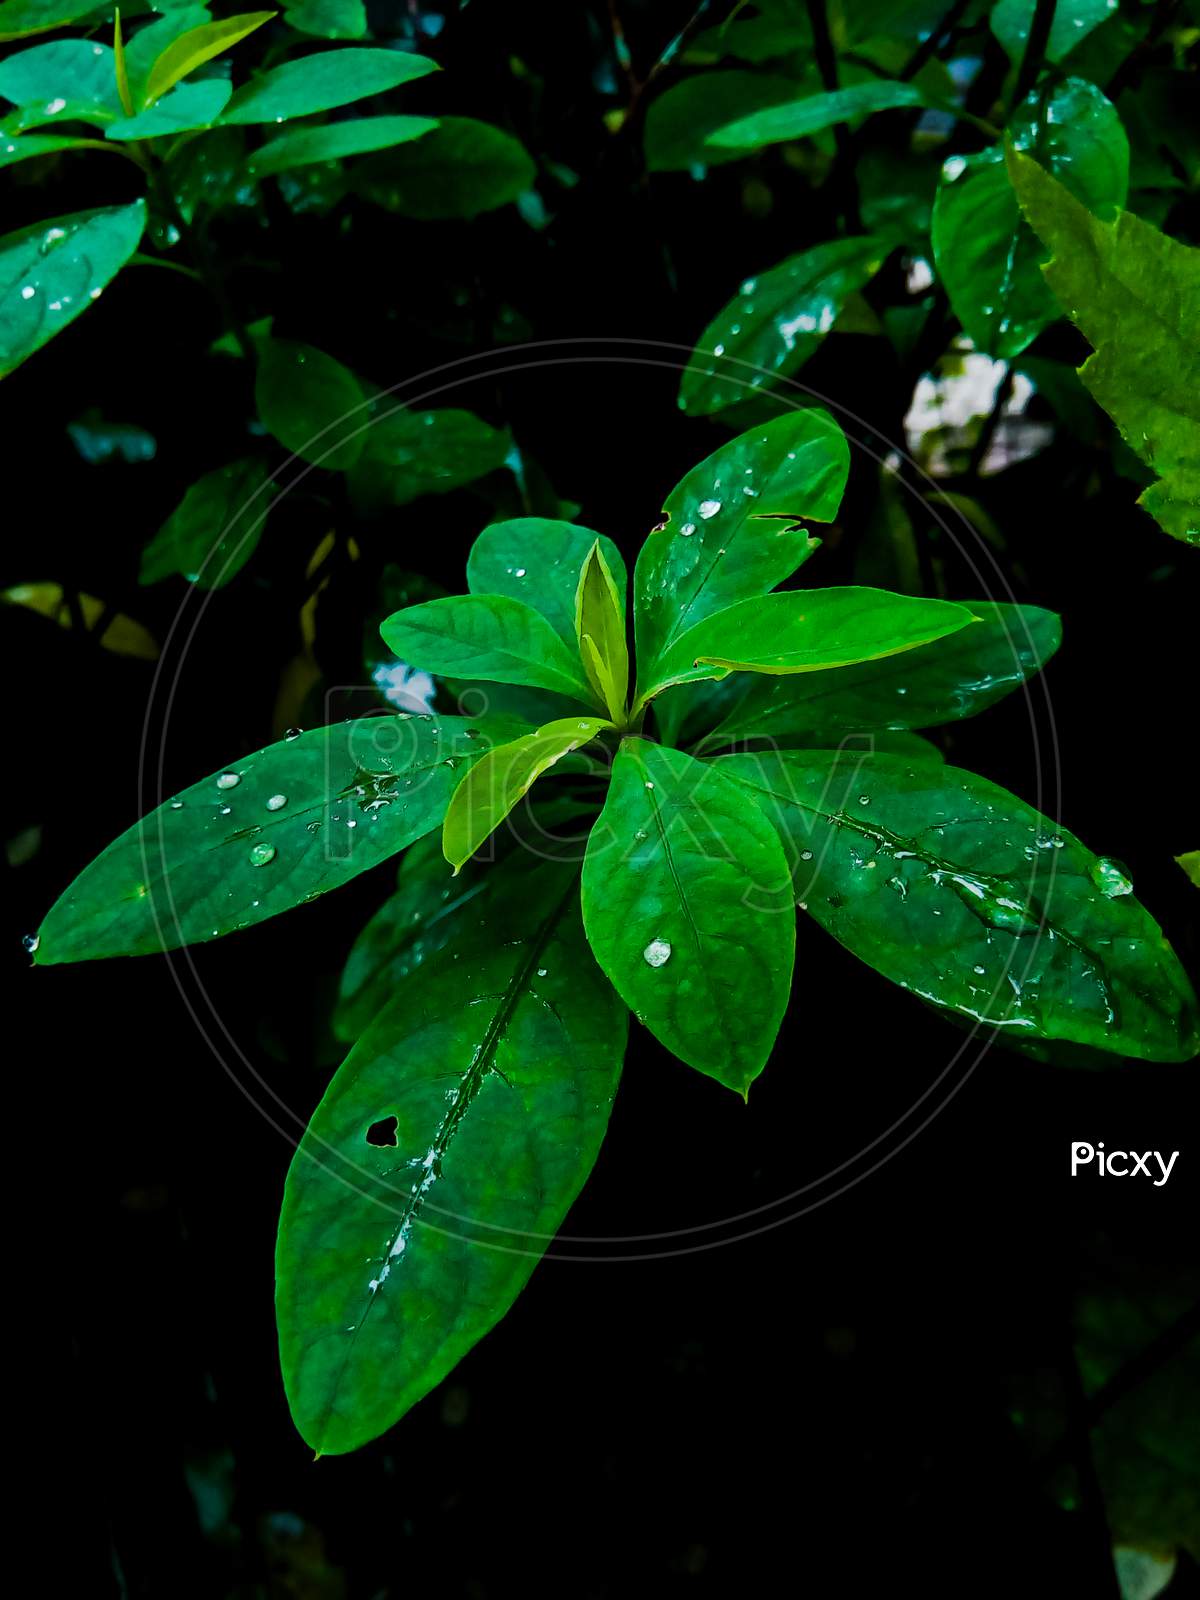 Small water droplets on leaf.